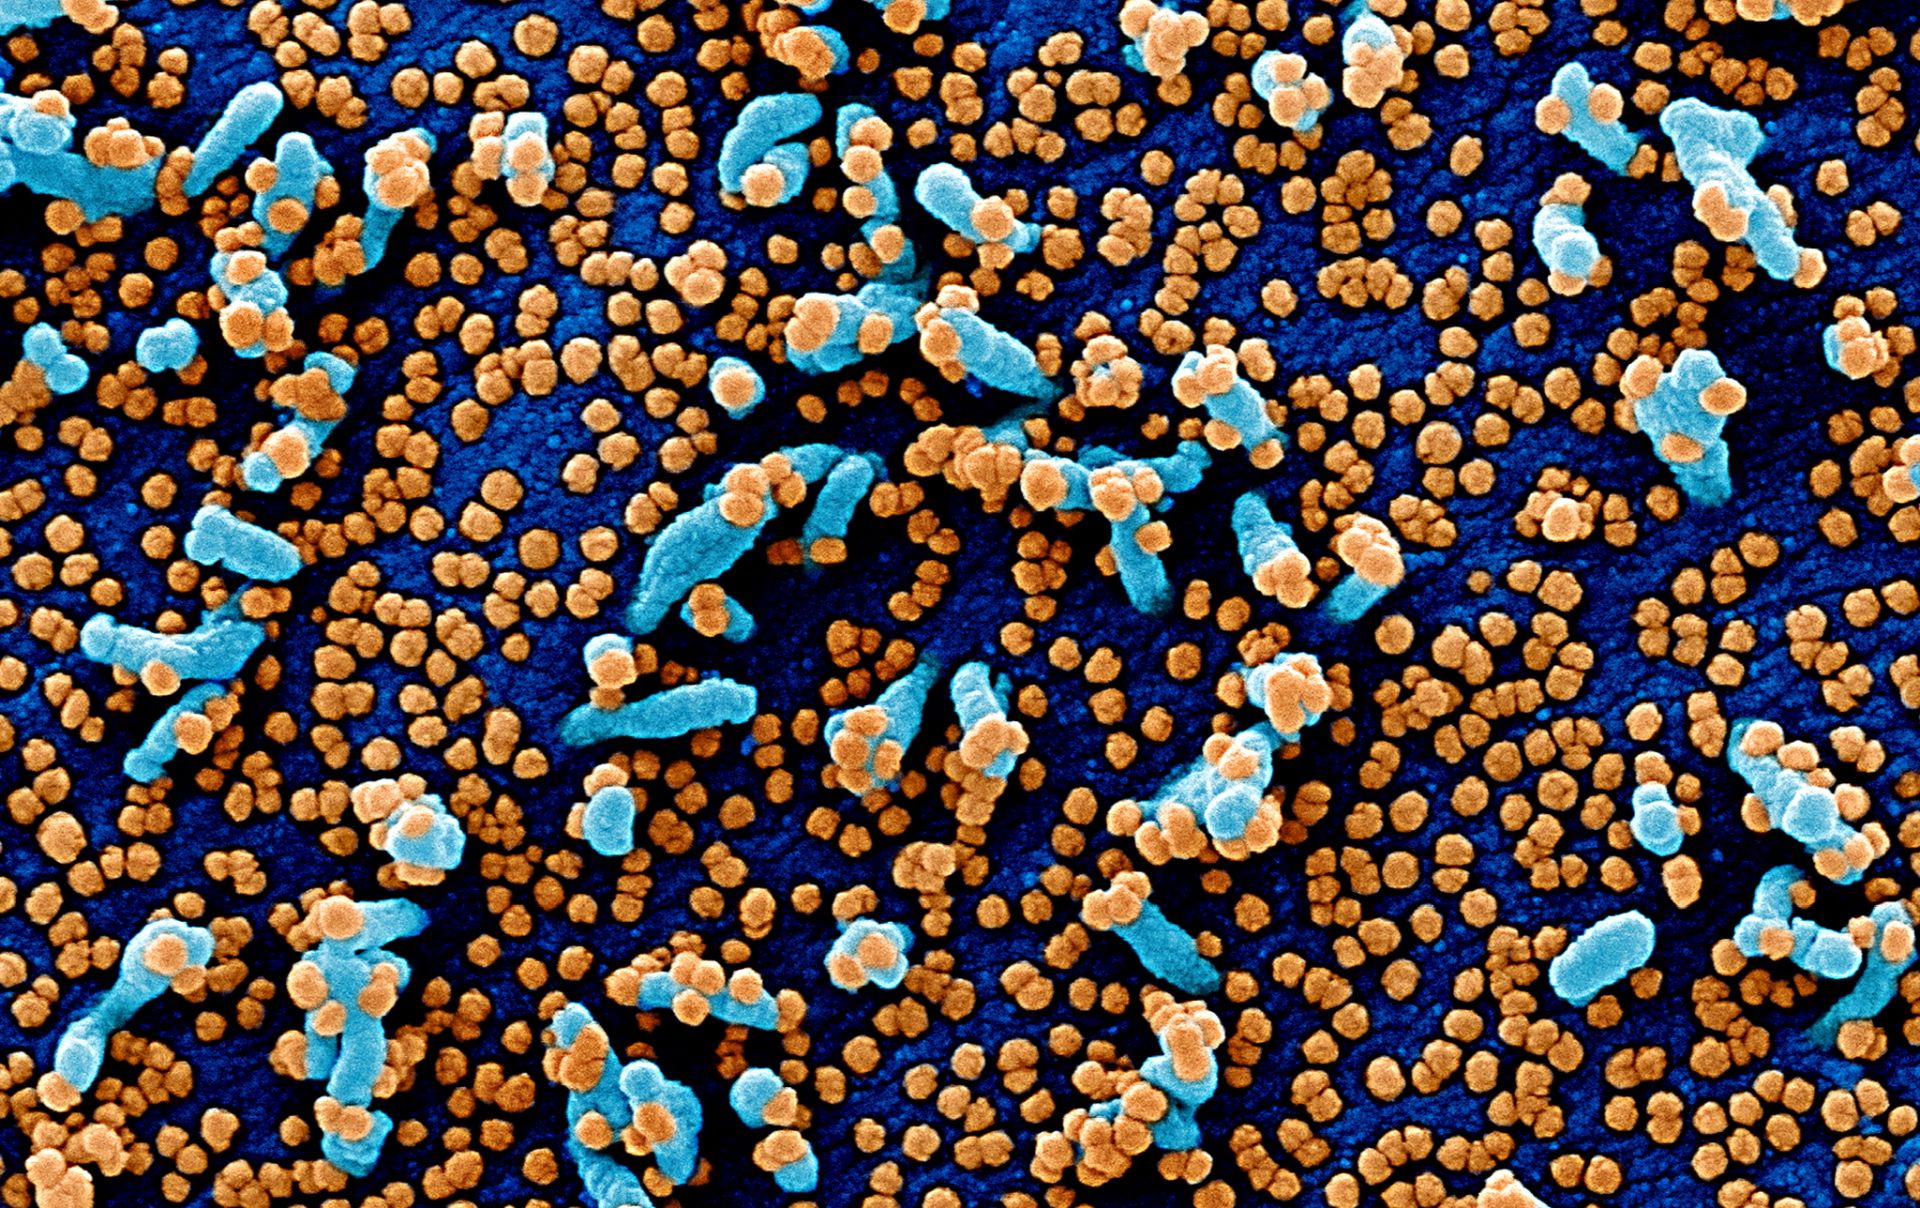 epa08319728 An undated handout image captured and color-enhanced at the National Institute of Allergy and Infectious Diseases (NIAID) Integrated Research Facility (IRF) in Fort Detrick, Maryland, USA and made available by the National Institutes of Health (NIH) shows a colorized scanning electron micrograph of a VERO E6 cell (blue) heavily infected with SARS-COV-2 virus particles (orange), isolated from a patient sample (issued 24 March 2020). The novel coronavirus SARS-COV-2, which causes the Covid-19 disease, has been recognized as a pandemic by the World Health Organization (WHO) on 11 March 2020.  EPA/NIAID/NATIONAL INSTITUTES OF HEALTH HANDOUT  HANDOUT EDITORIAL USE ONLY/NO SALES